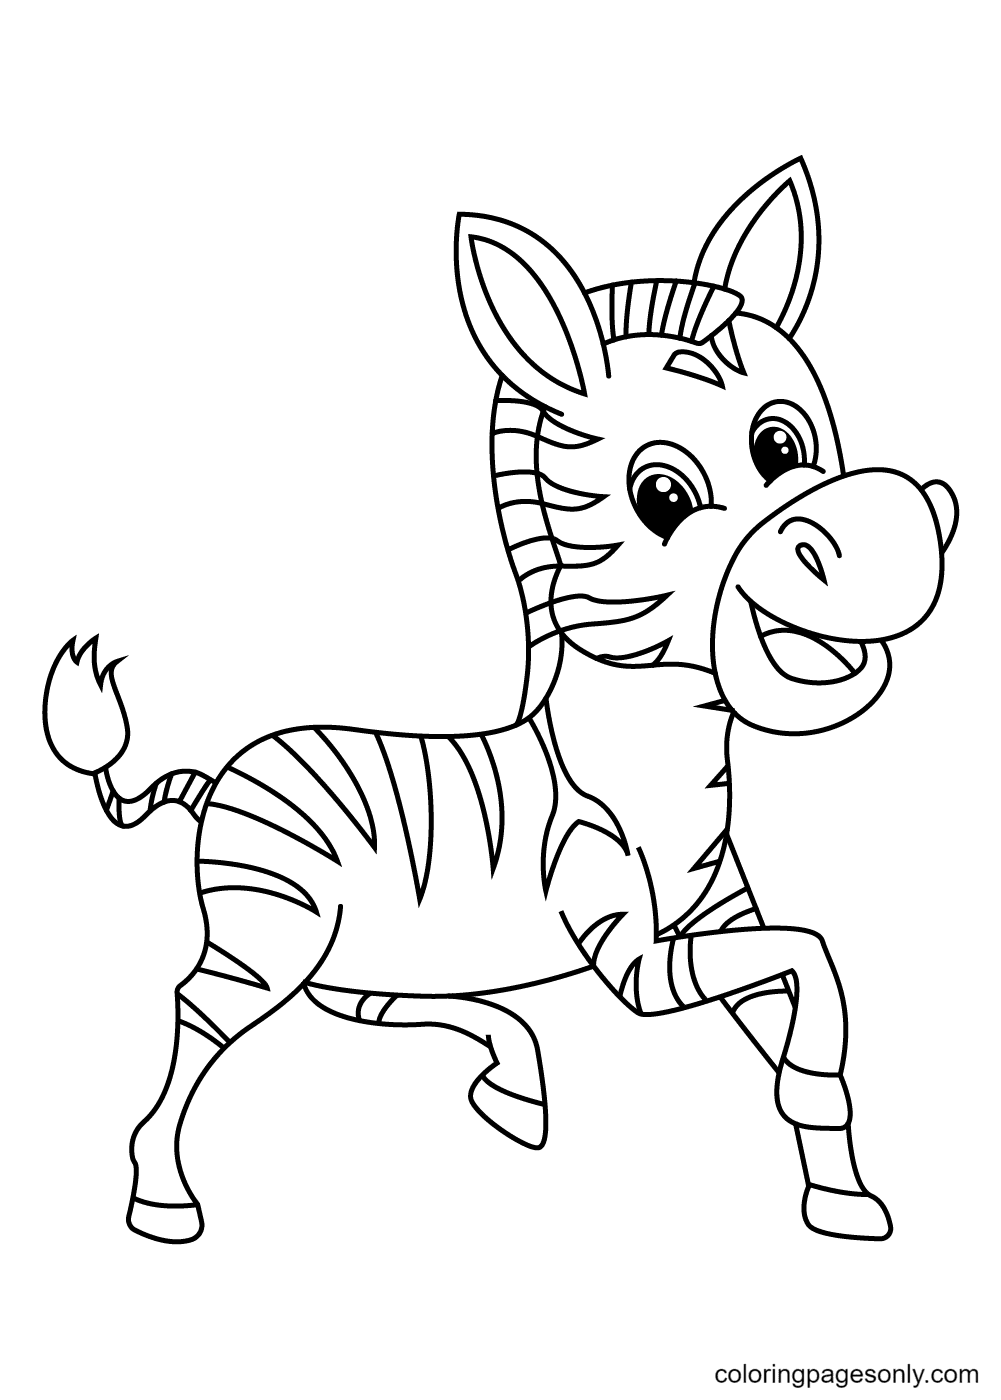 Zebra happy and smiling Coloring Pages